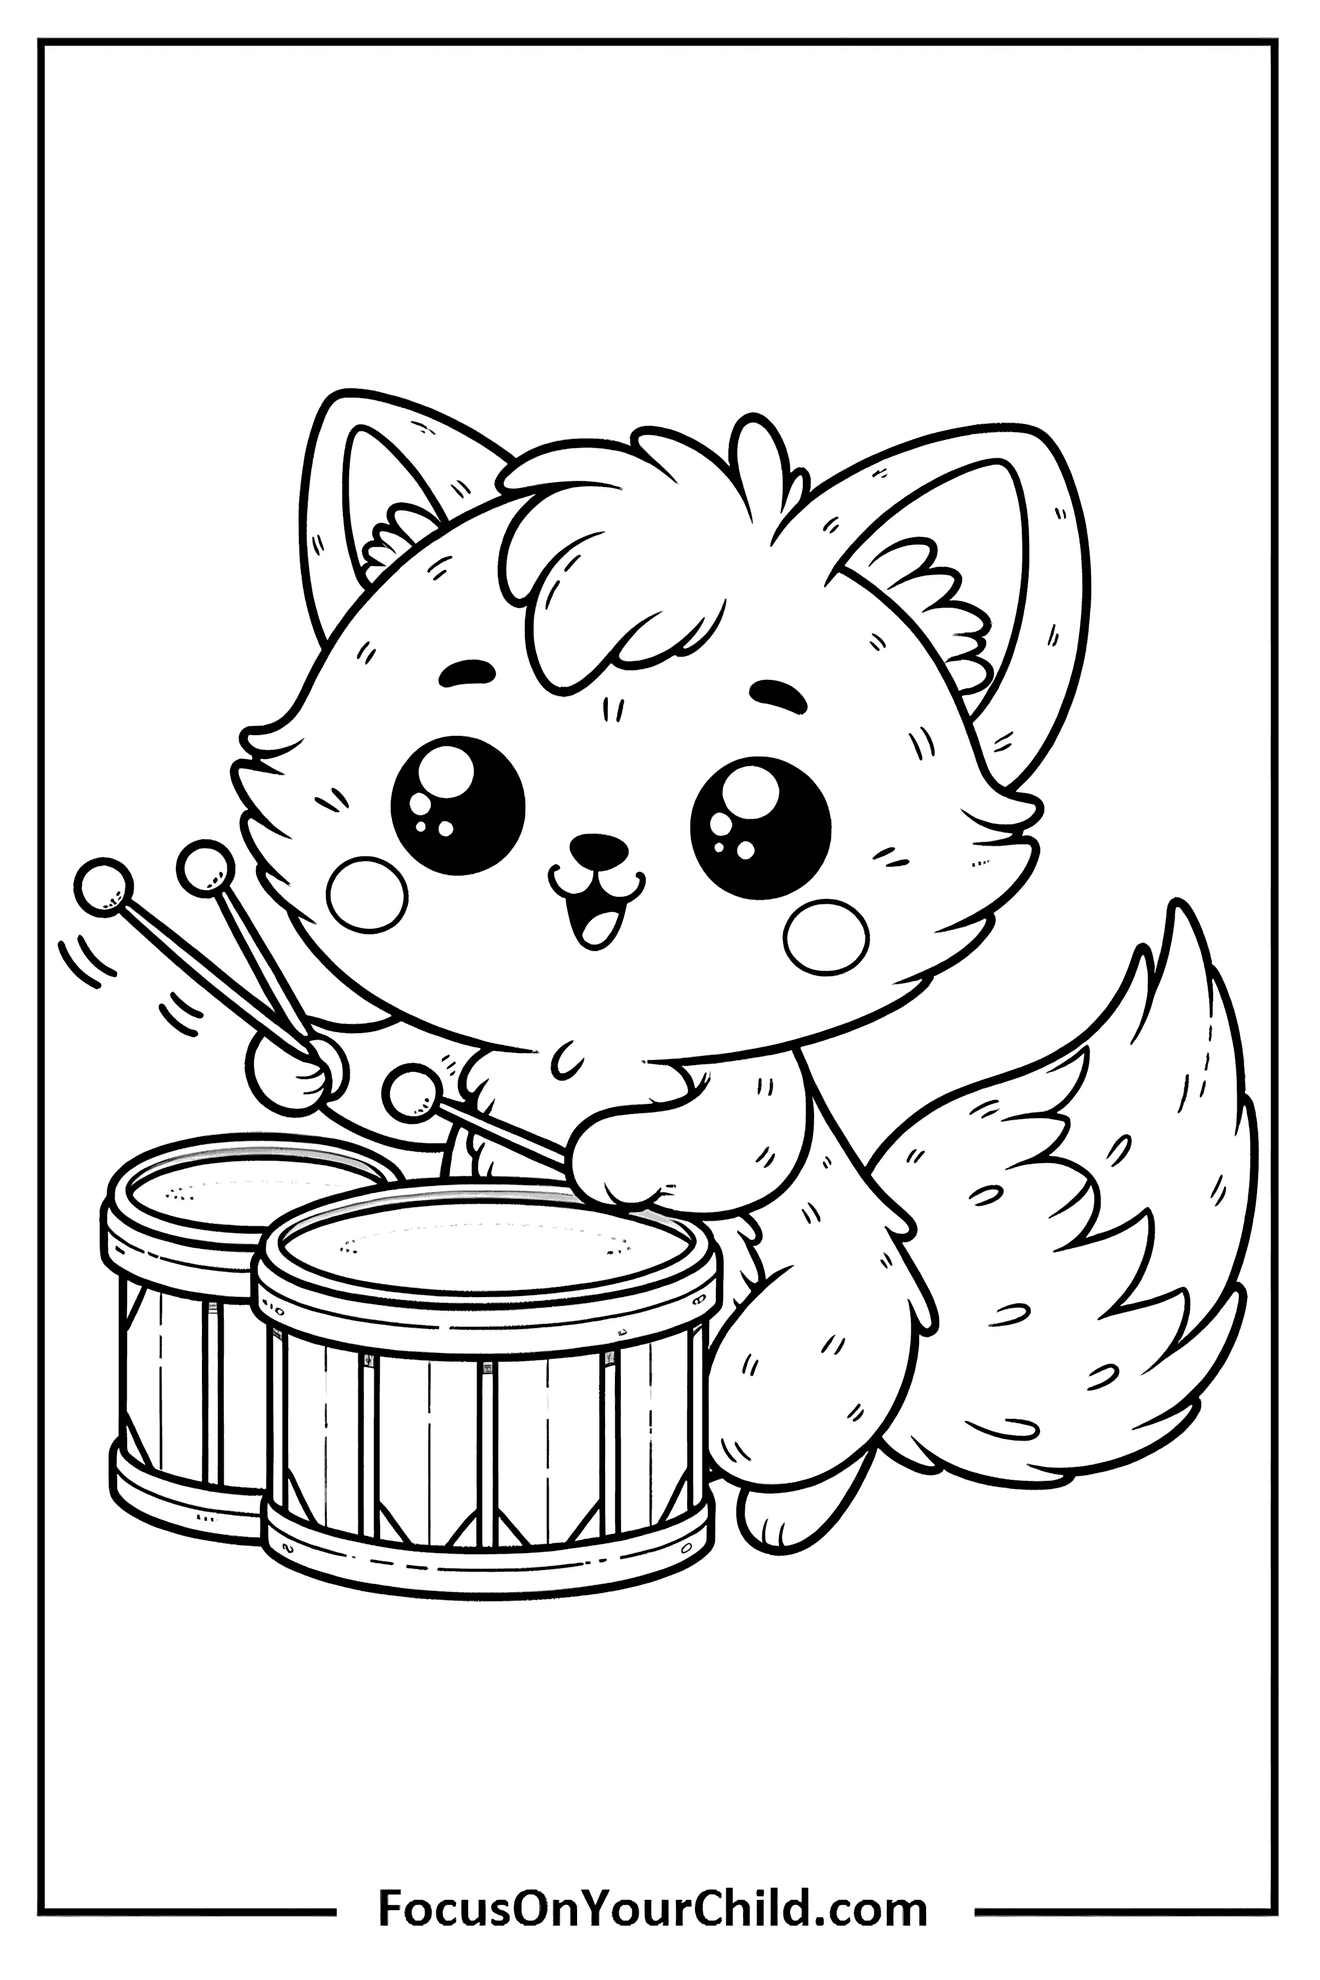 Cute fox playing drums in black-and-white cartoon illustration.